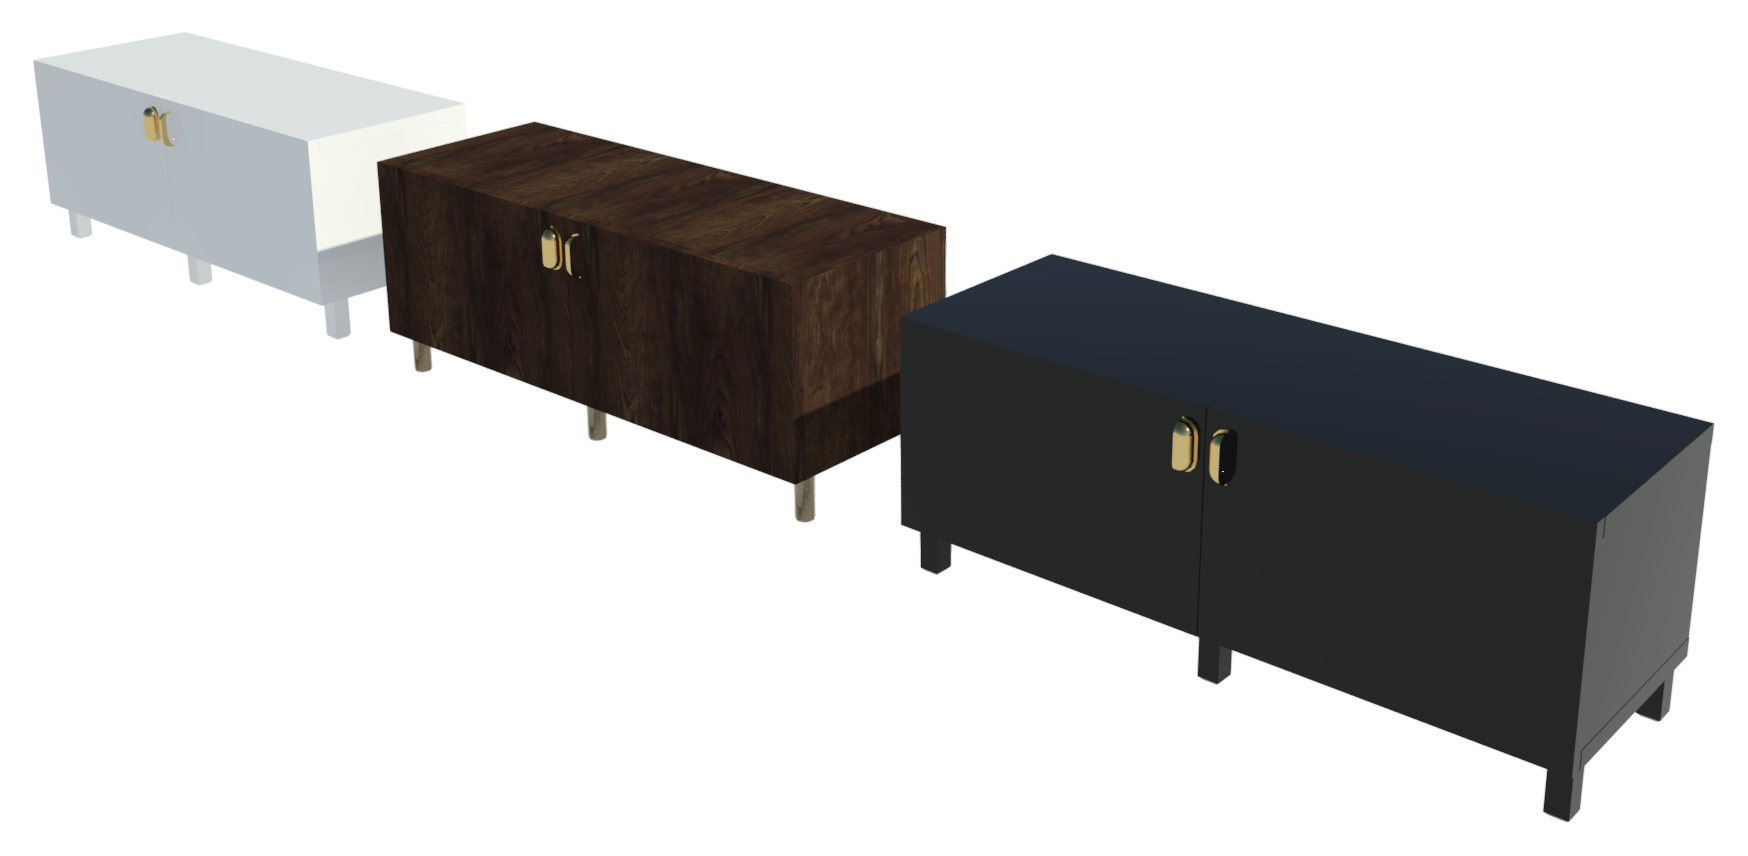 Revit render of three Besta TV Unit cupboards with white, brown stained oak and black finished front panels, and brass ENERYDA cup handles.